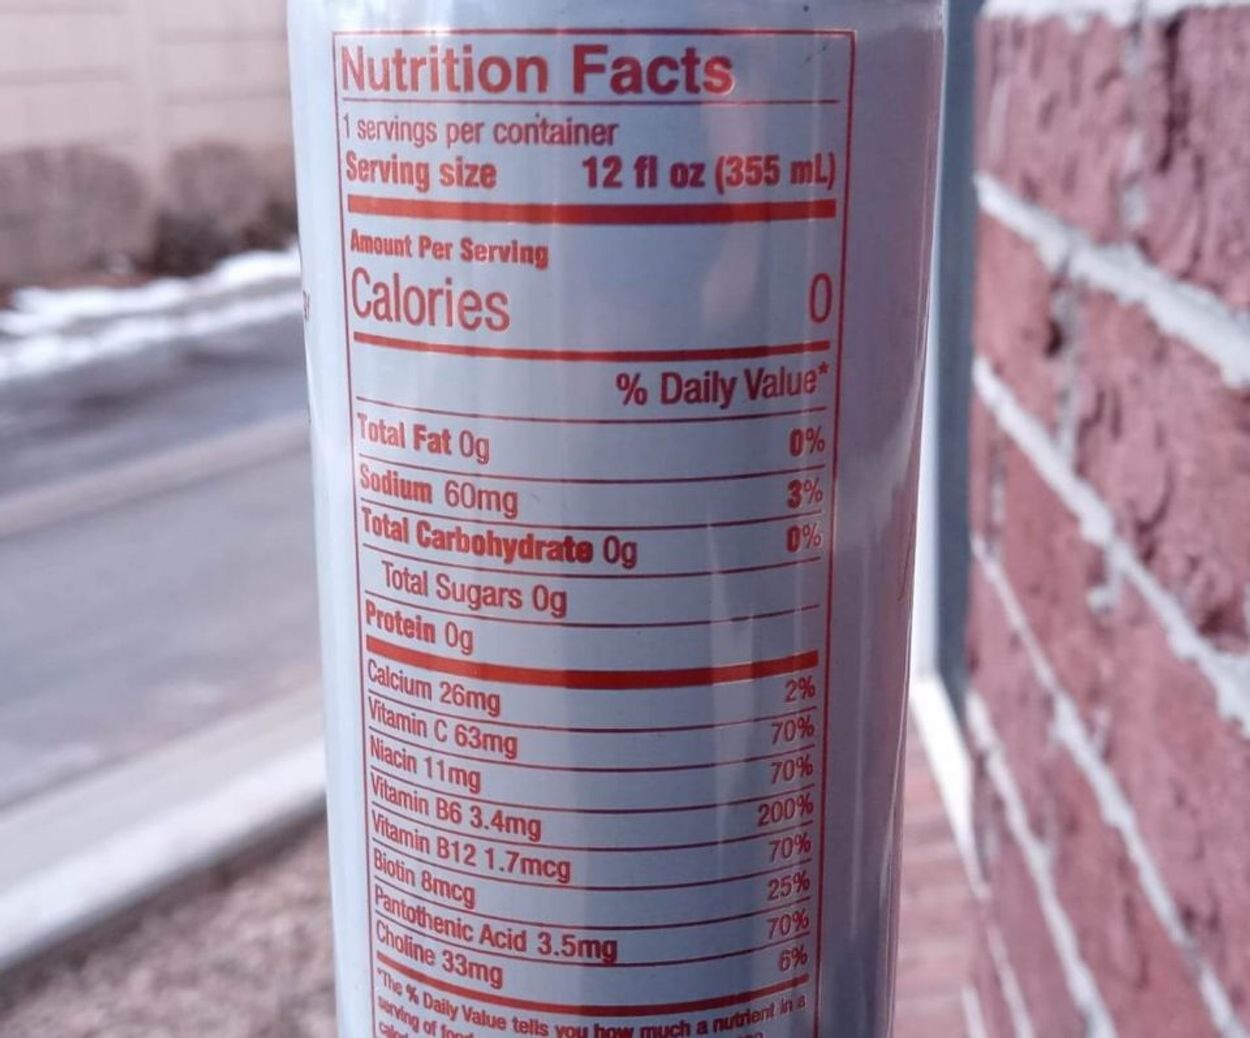 Nutrition facts of Aspire Energy Drink.